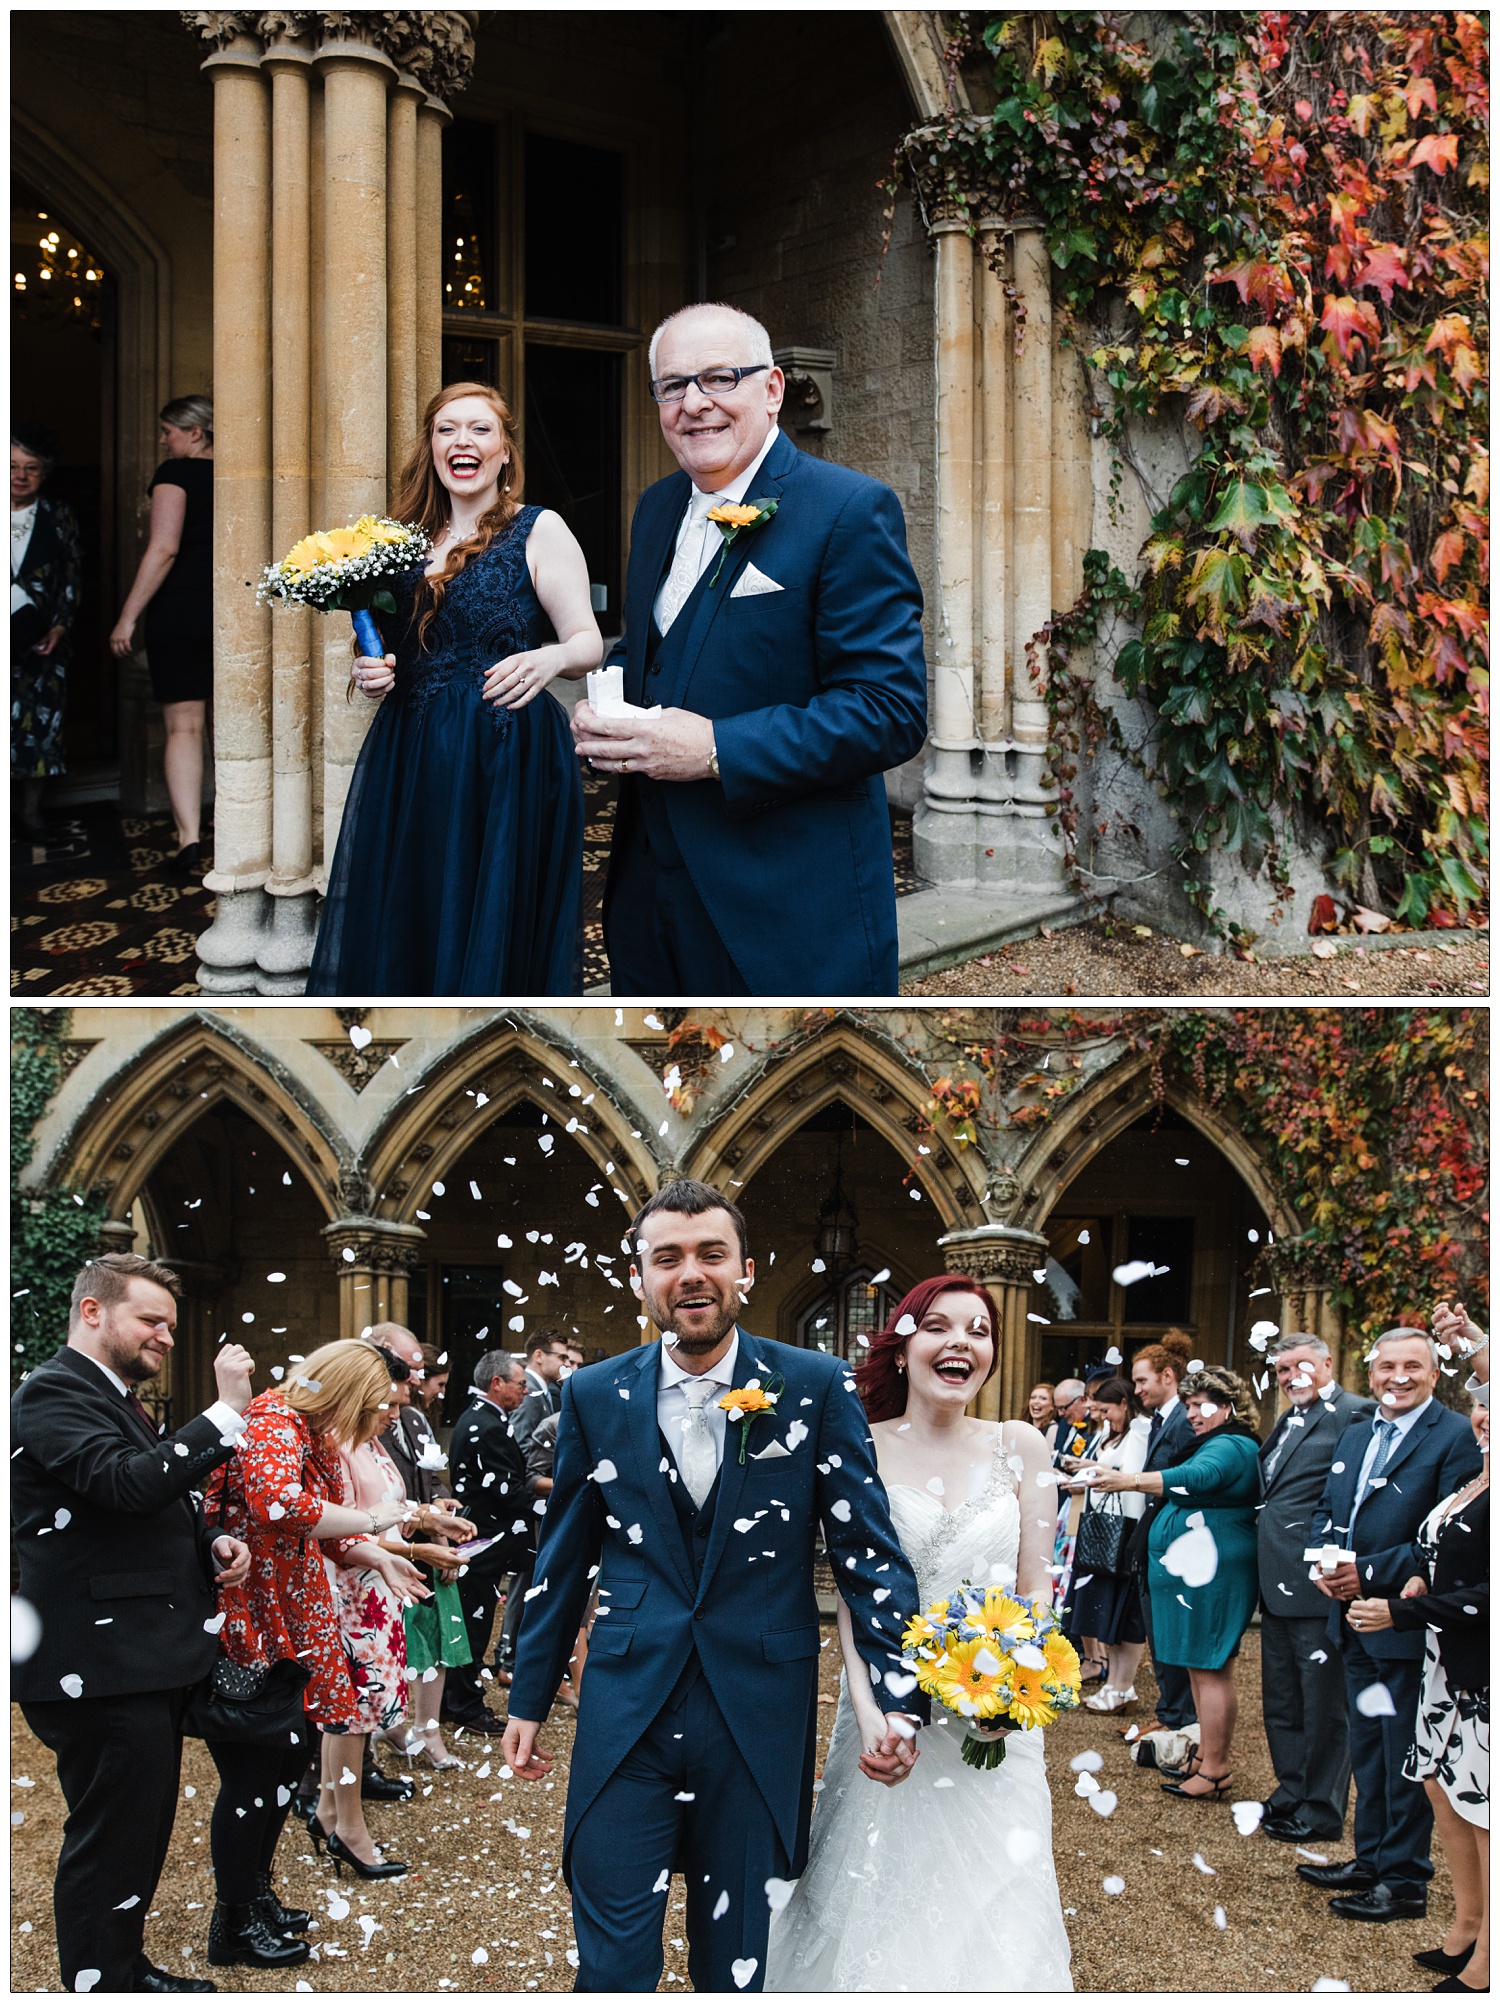 Bride and groom laughing walk past their wedding guests who are throwing confetti at them. The arches of Manor by the Lake covered in autumn leaves in the background.